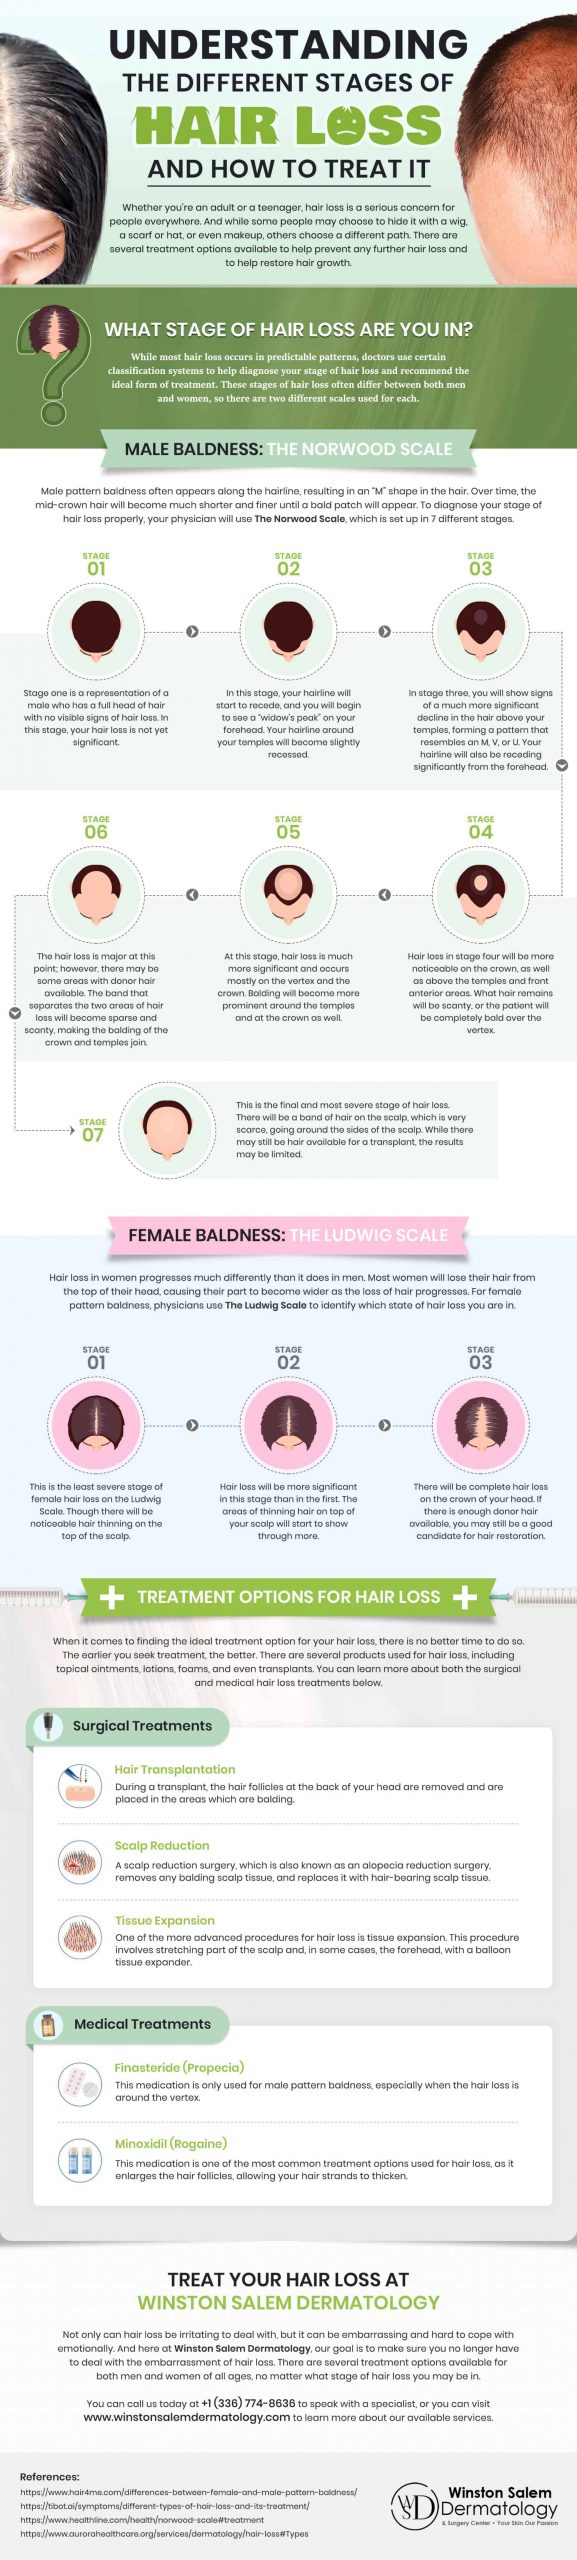 Understanding the Different Stages of Hair Loss